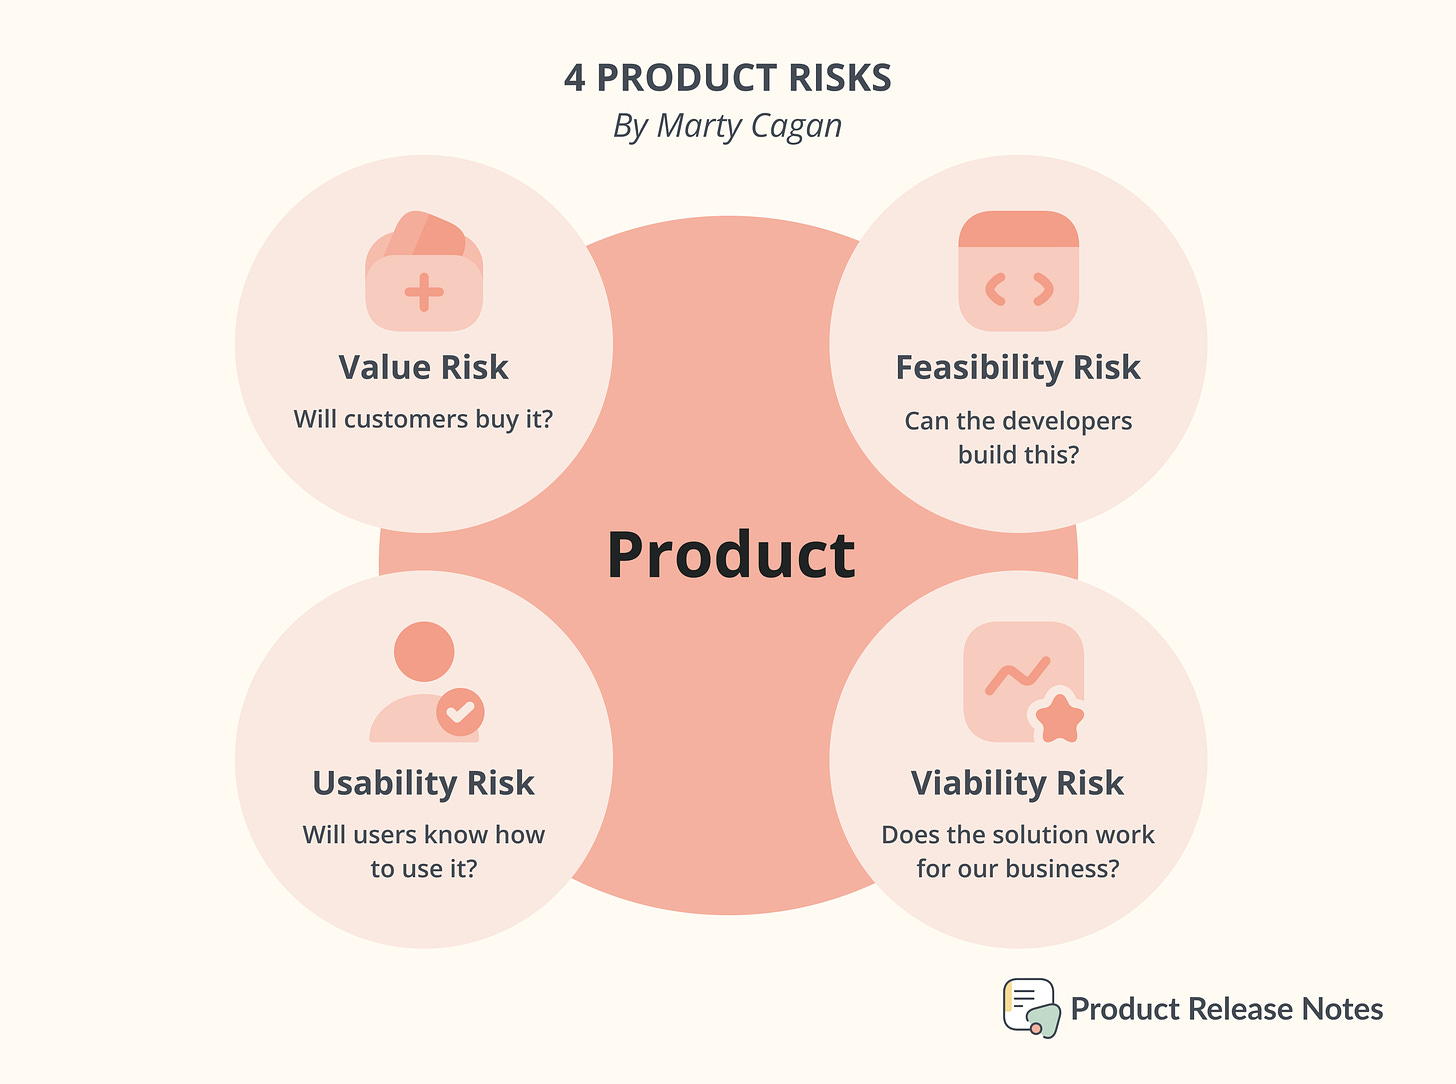 The 4 types of product risks by Marty Cagan.